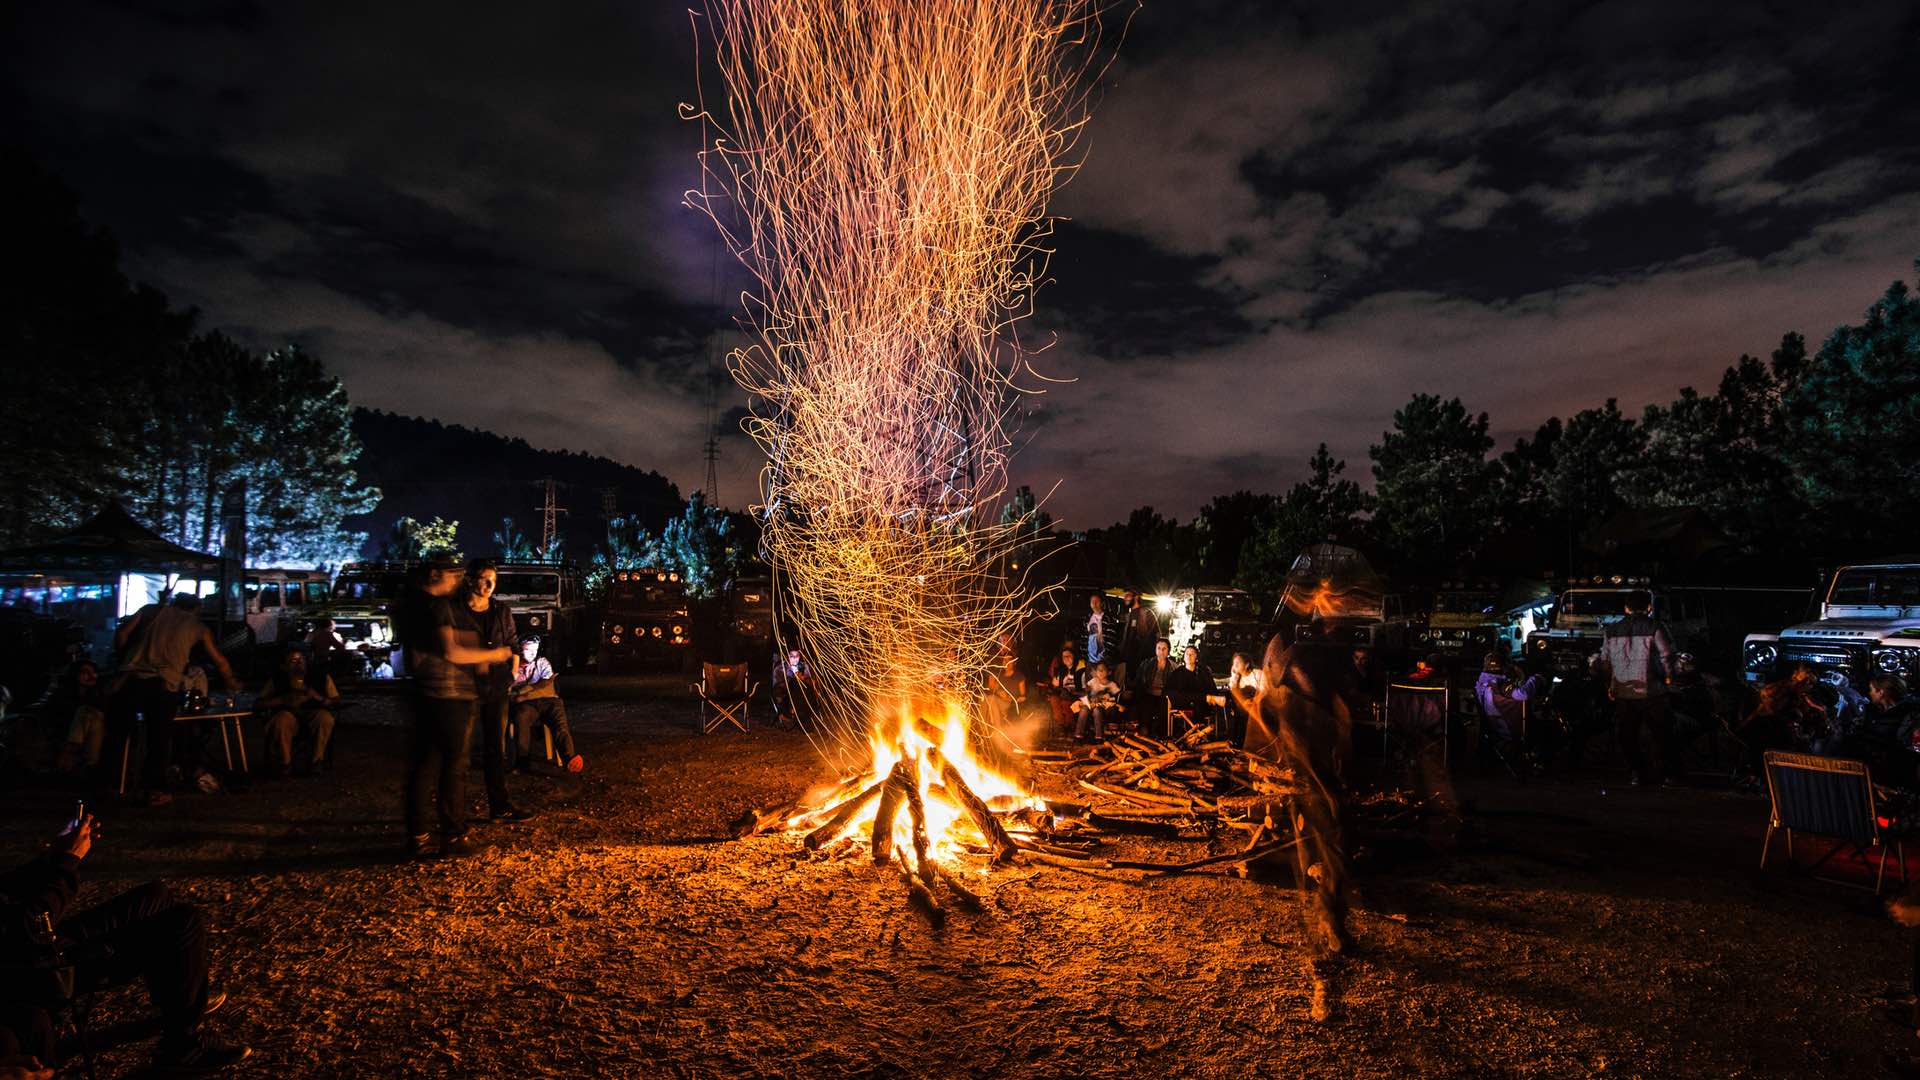 This New BYO 'Adventure Festival' Combines Camping, Live Music and Lots of Outdoor Activities